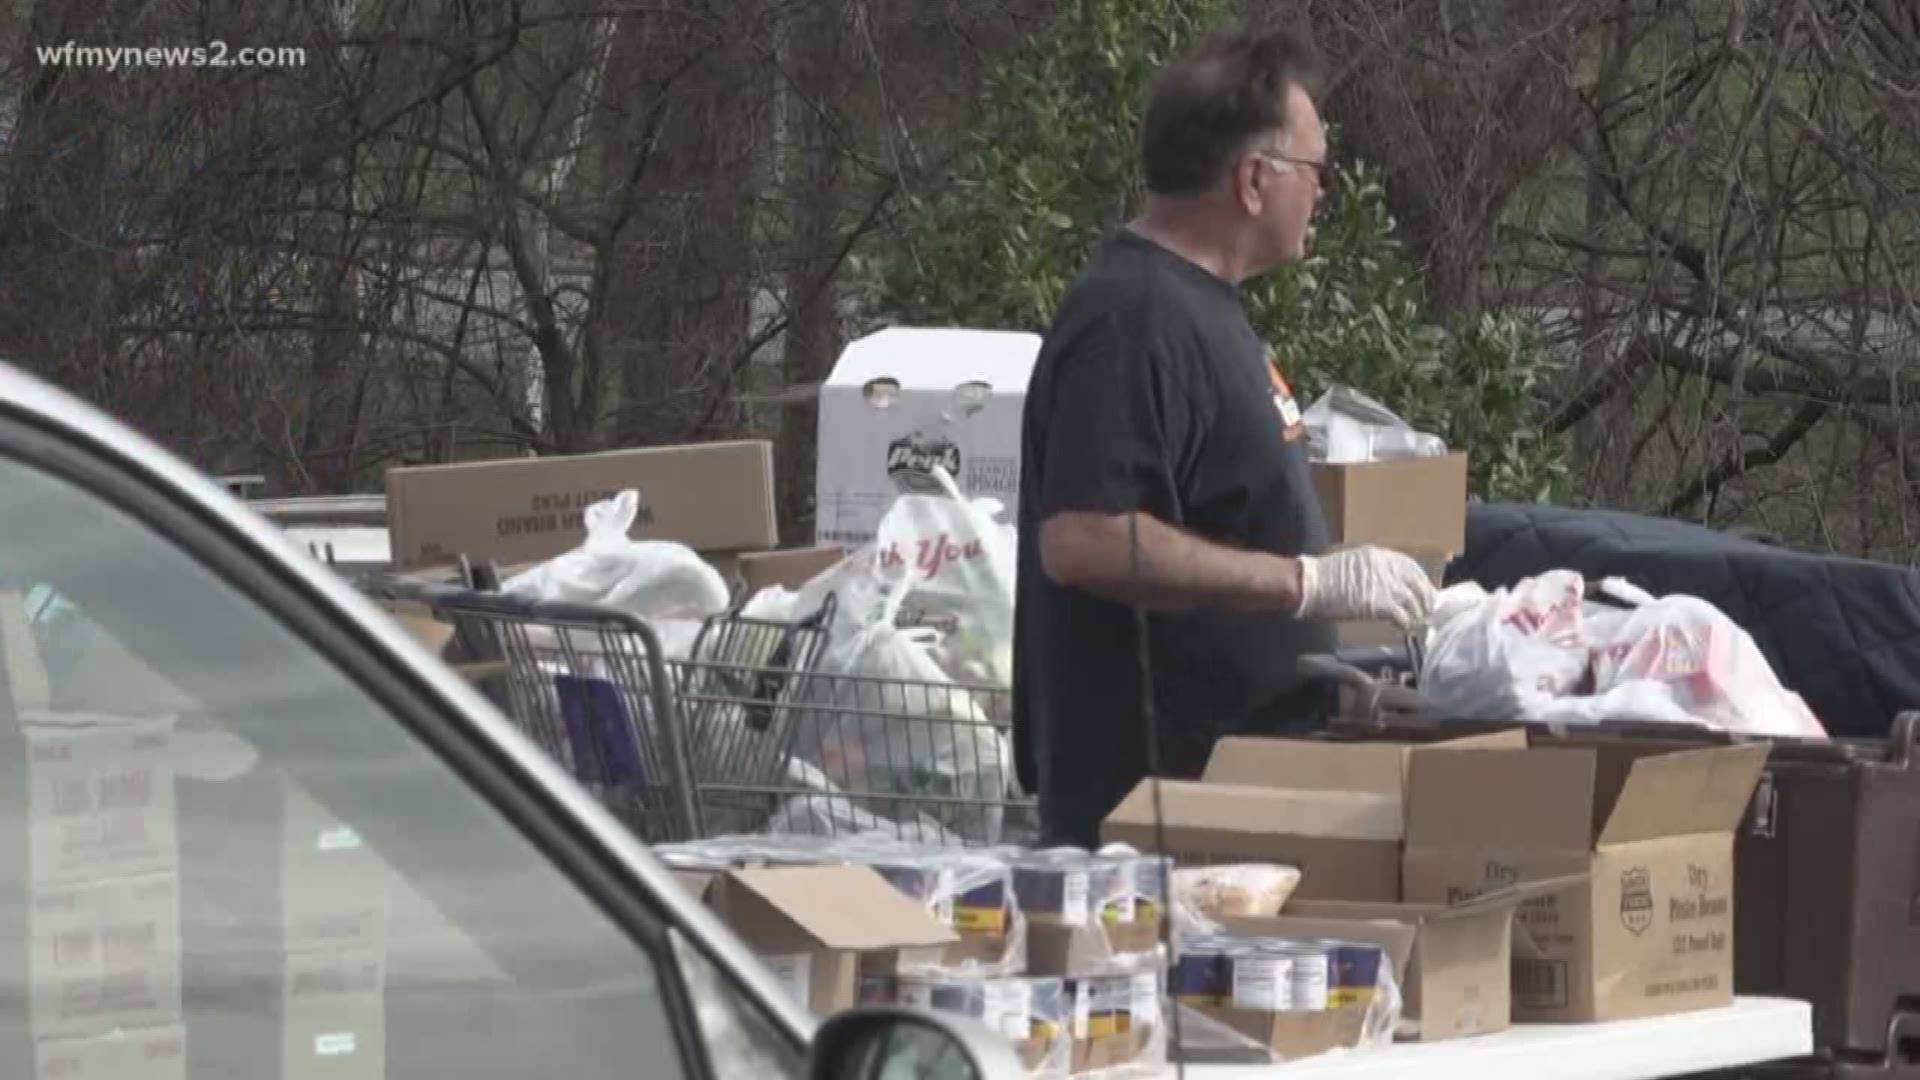 Daystar Church serves free hot meals and groceries to families in need.